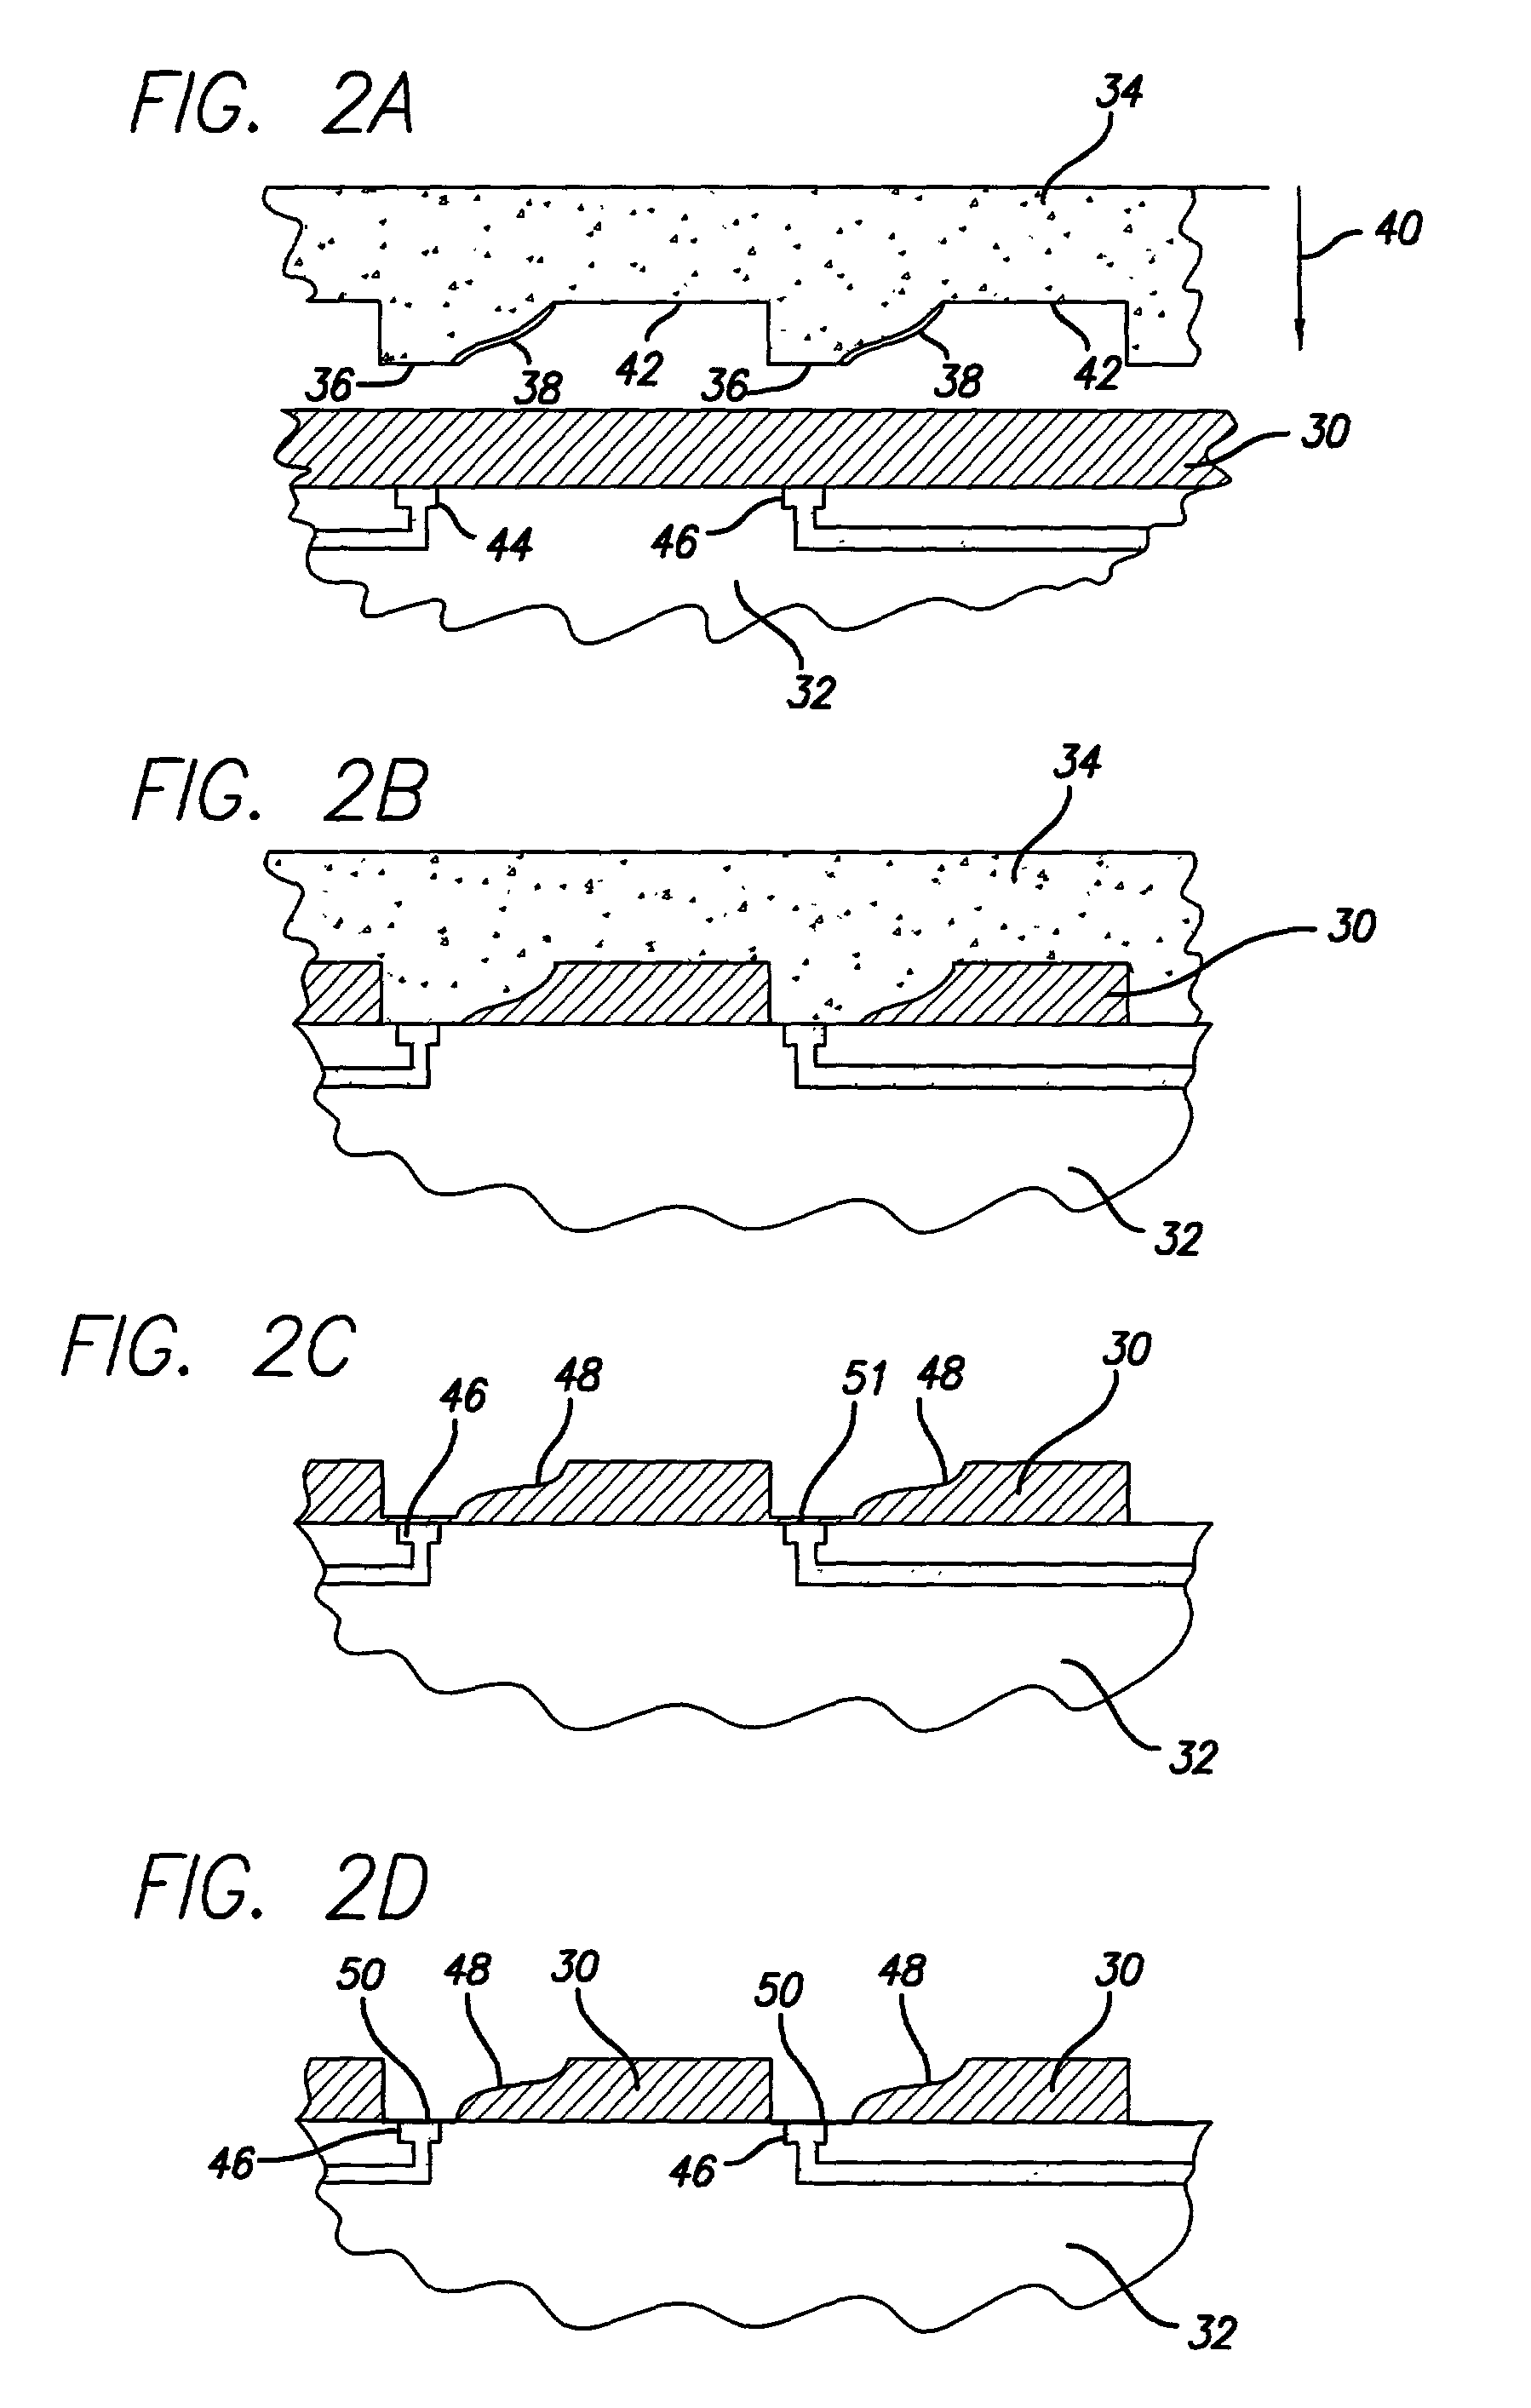 Method for forming microelectronic spring structures on a substrate